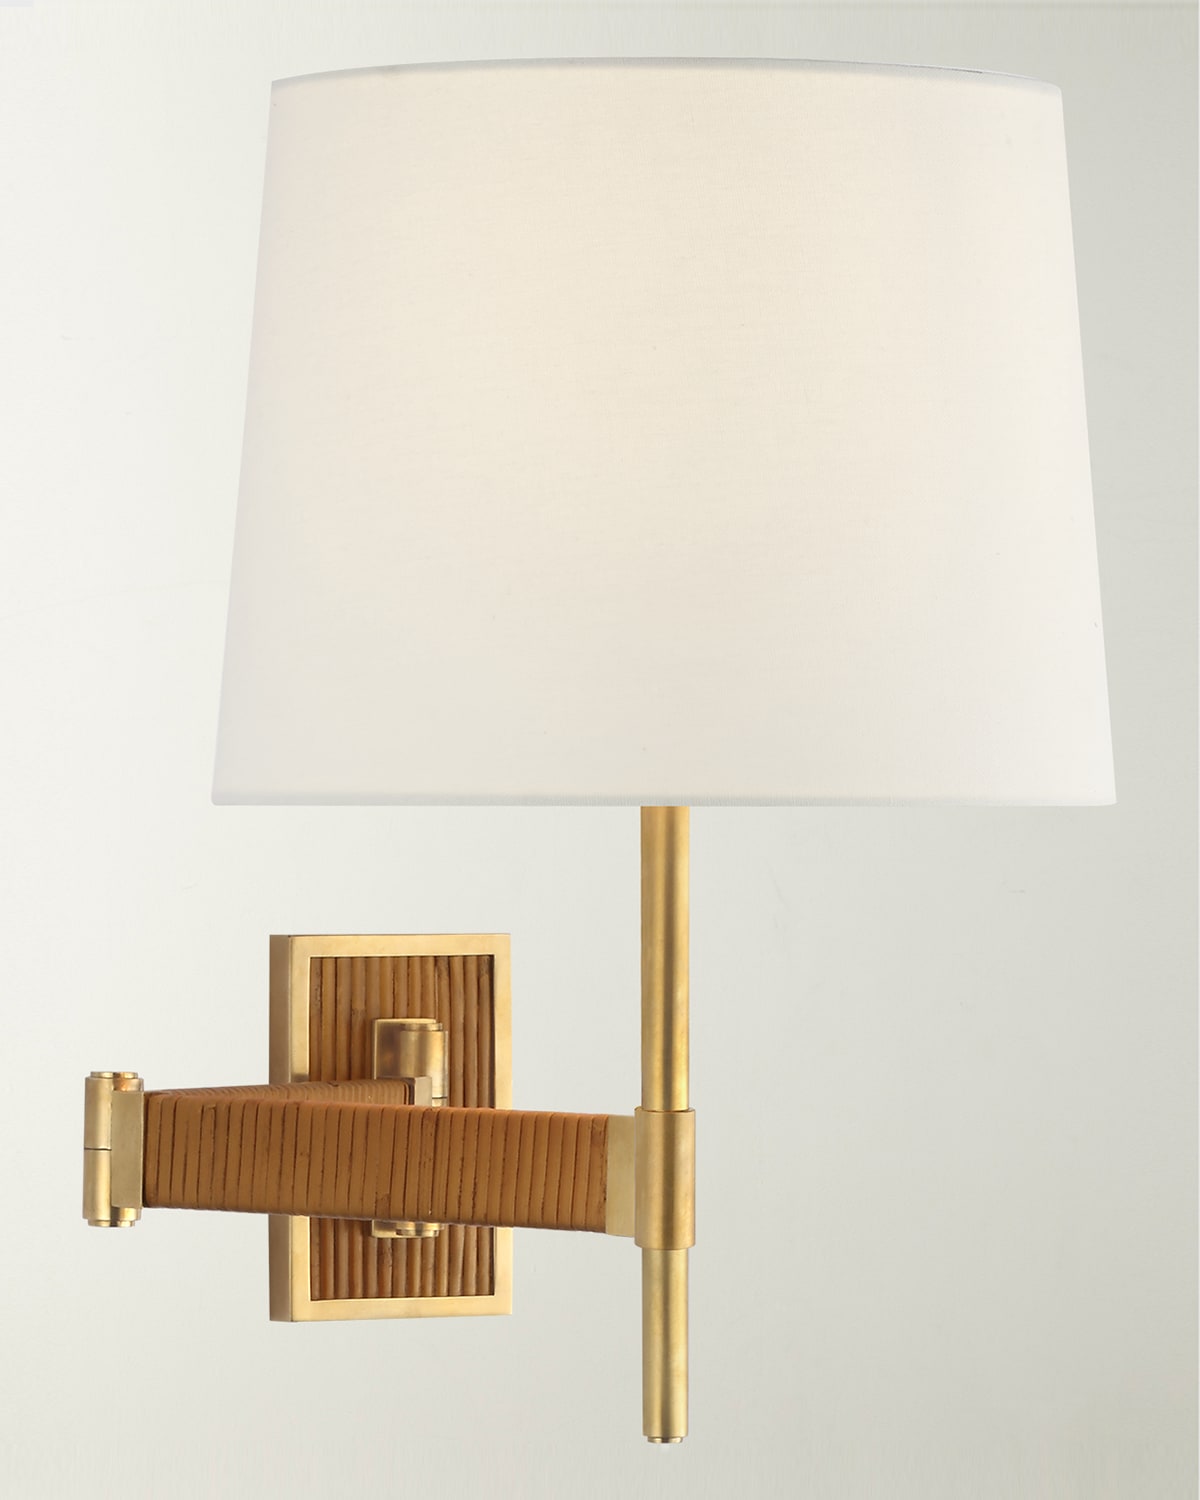 Shop Visual Comfort Signature Elle Swing Arm Sconce In Hand-rubbed Antique Brass And Dark Rattan With Linen Shade By Suzanne Kasle